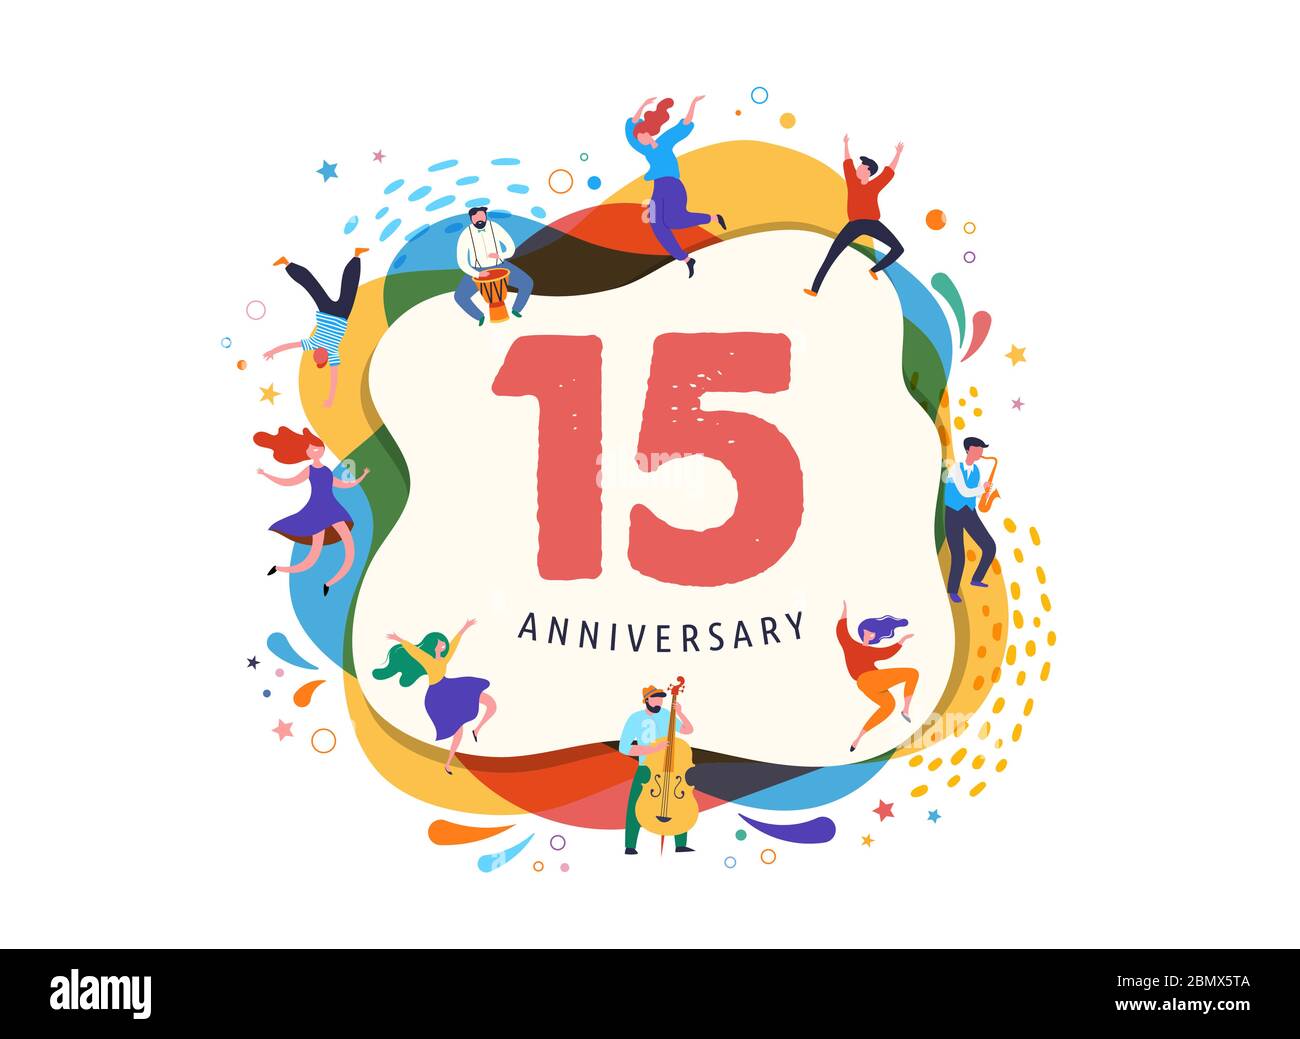 Anniversary celebration. Happy people dancing, playing music, celebrating. Vector illustration, banner, poster Stock Vector